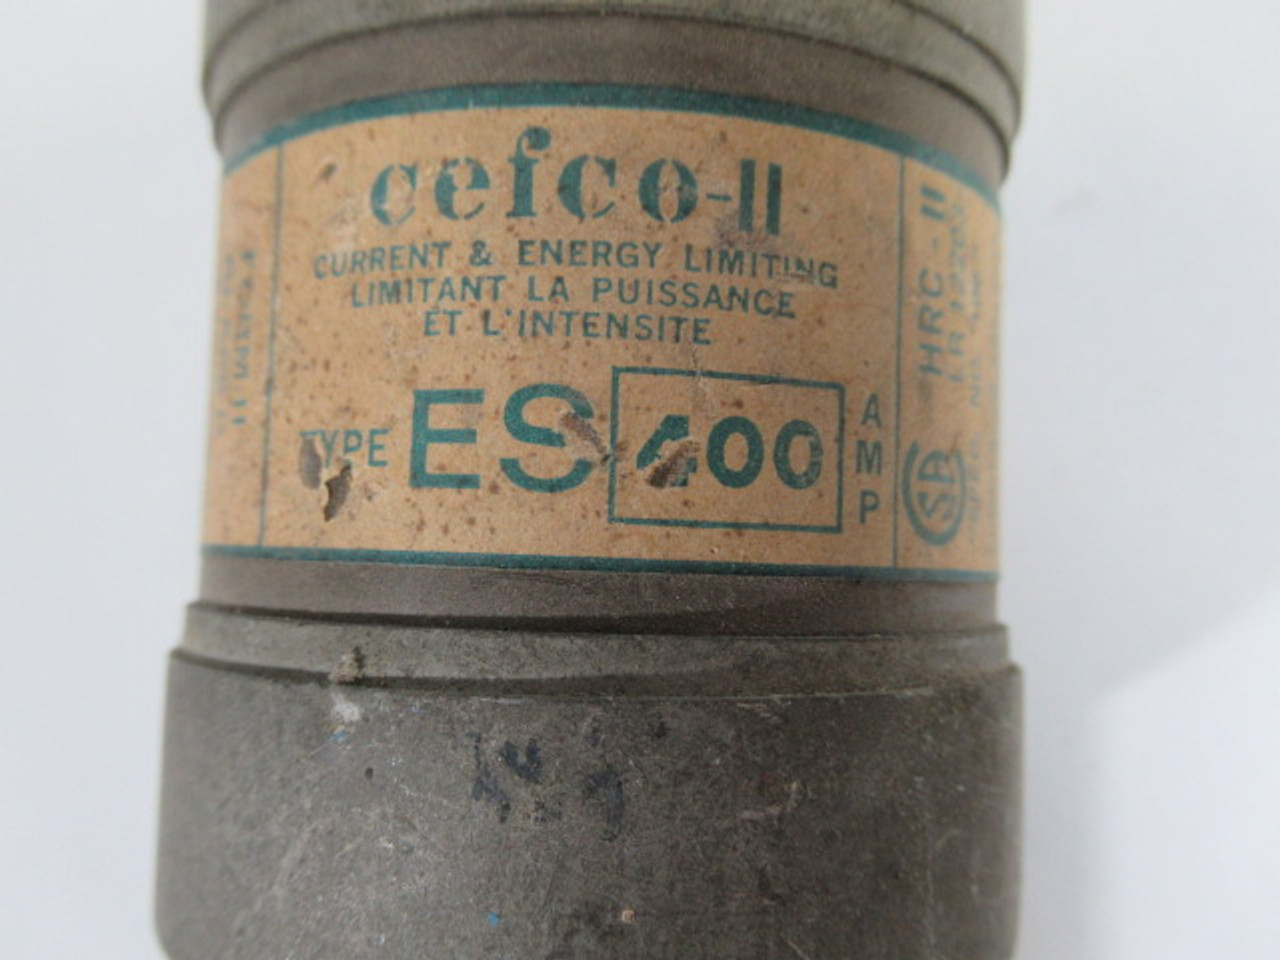 Cefco ES400 Current & Energy Limiting Fuse 400Amp 600V USED